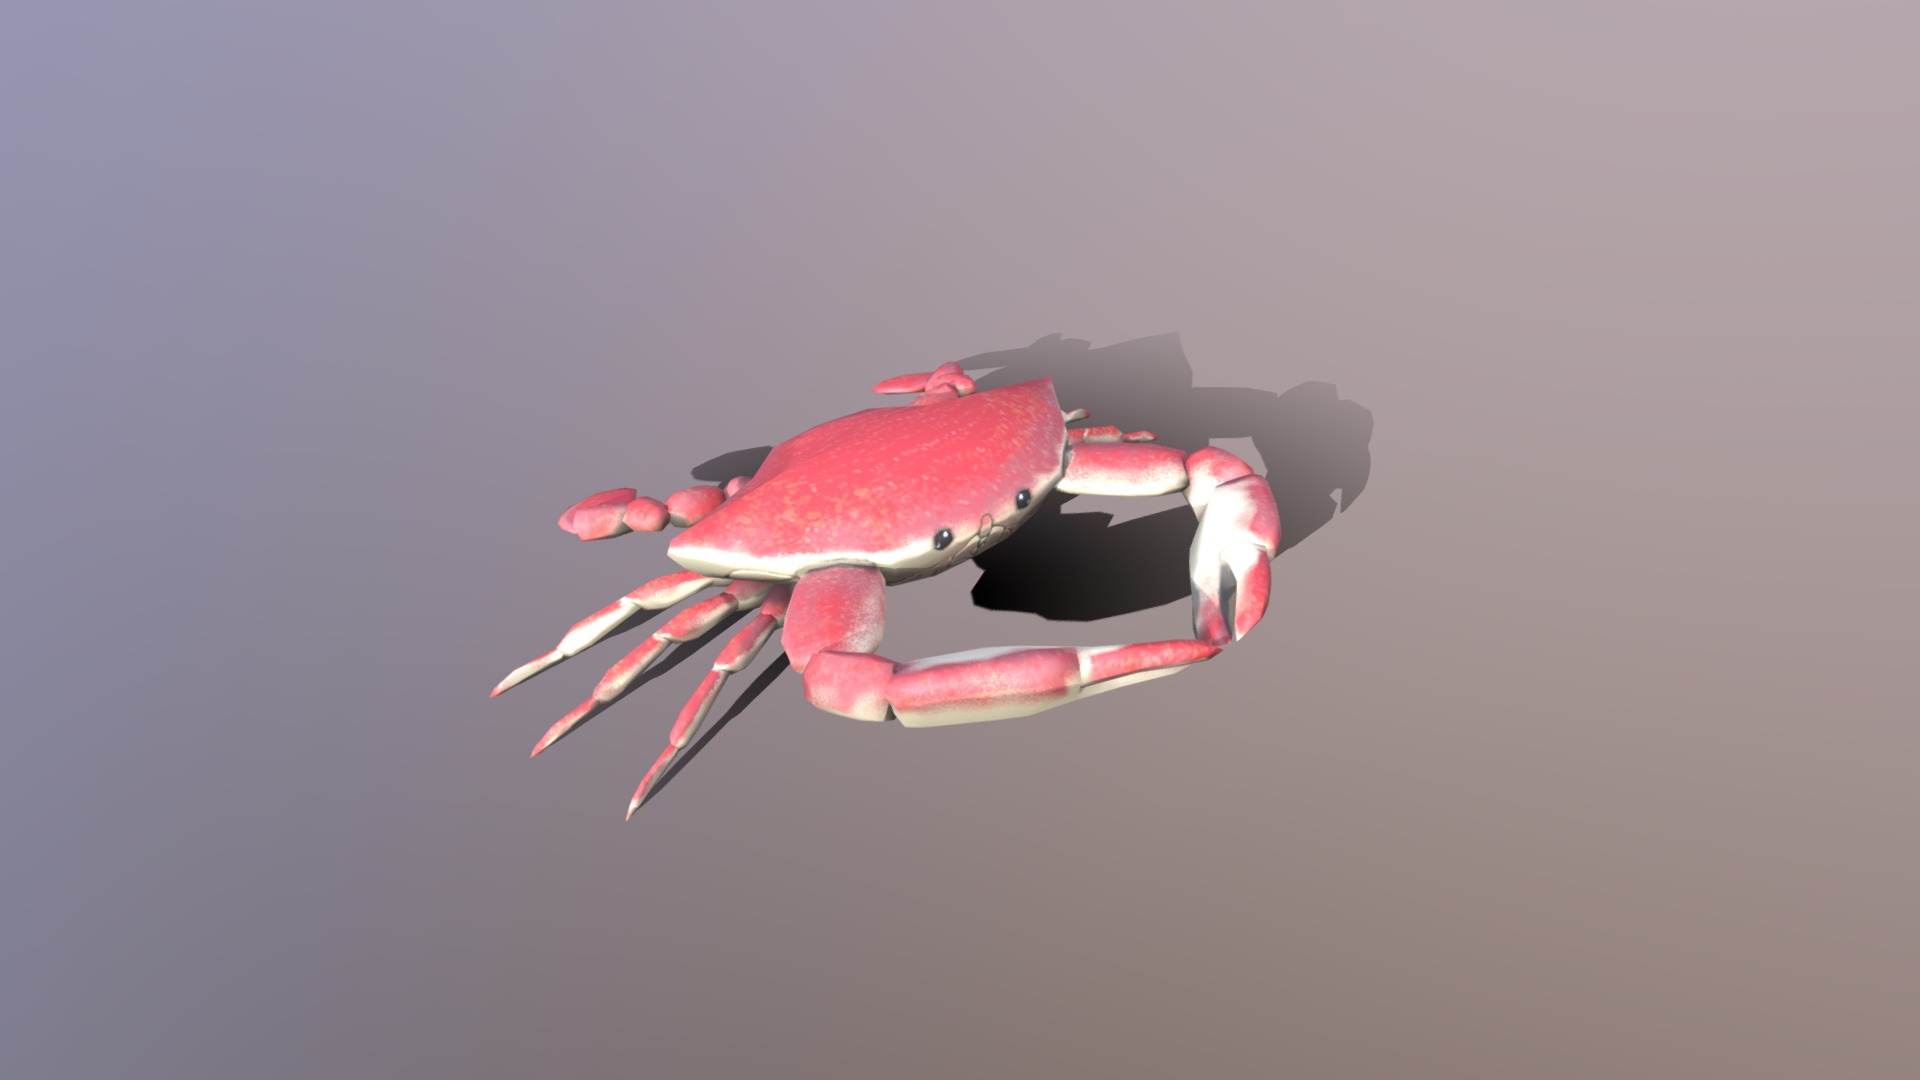 3D model Low Poly Crab - This is a 3D model of the Low Poly Crab. The 3D model is about a red and black drone.